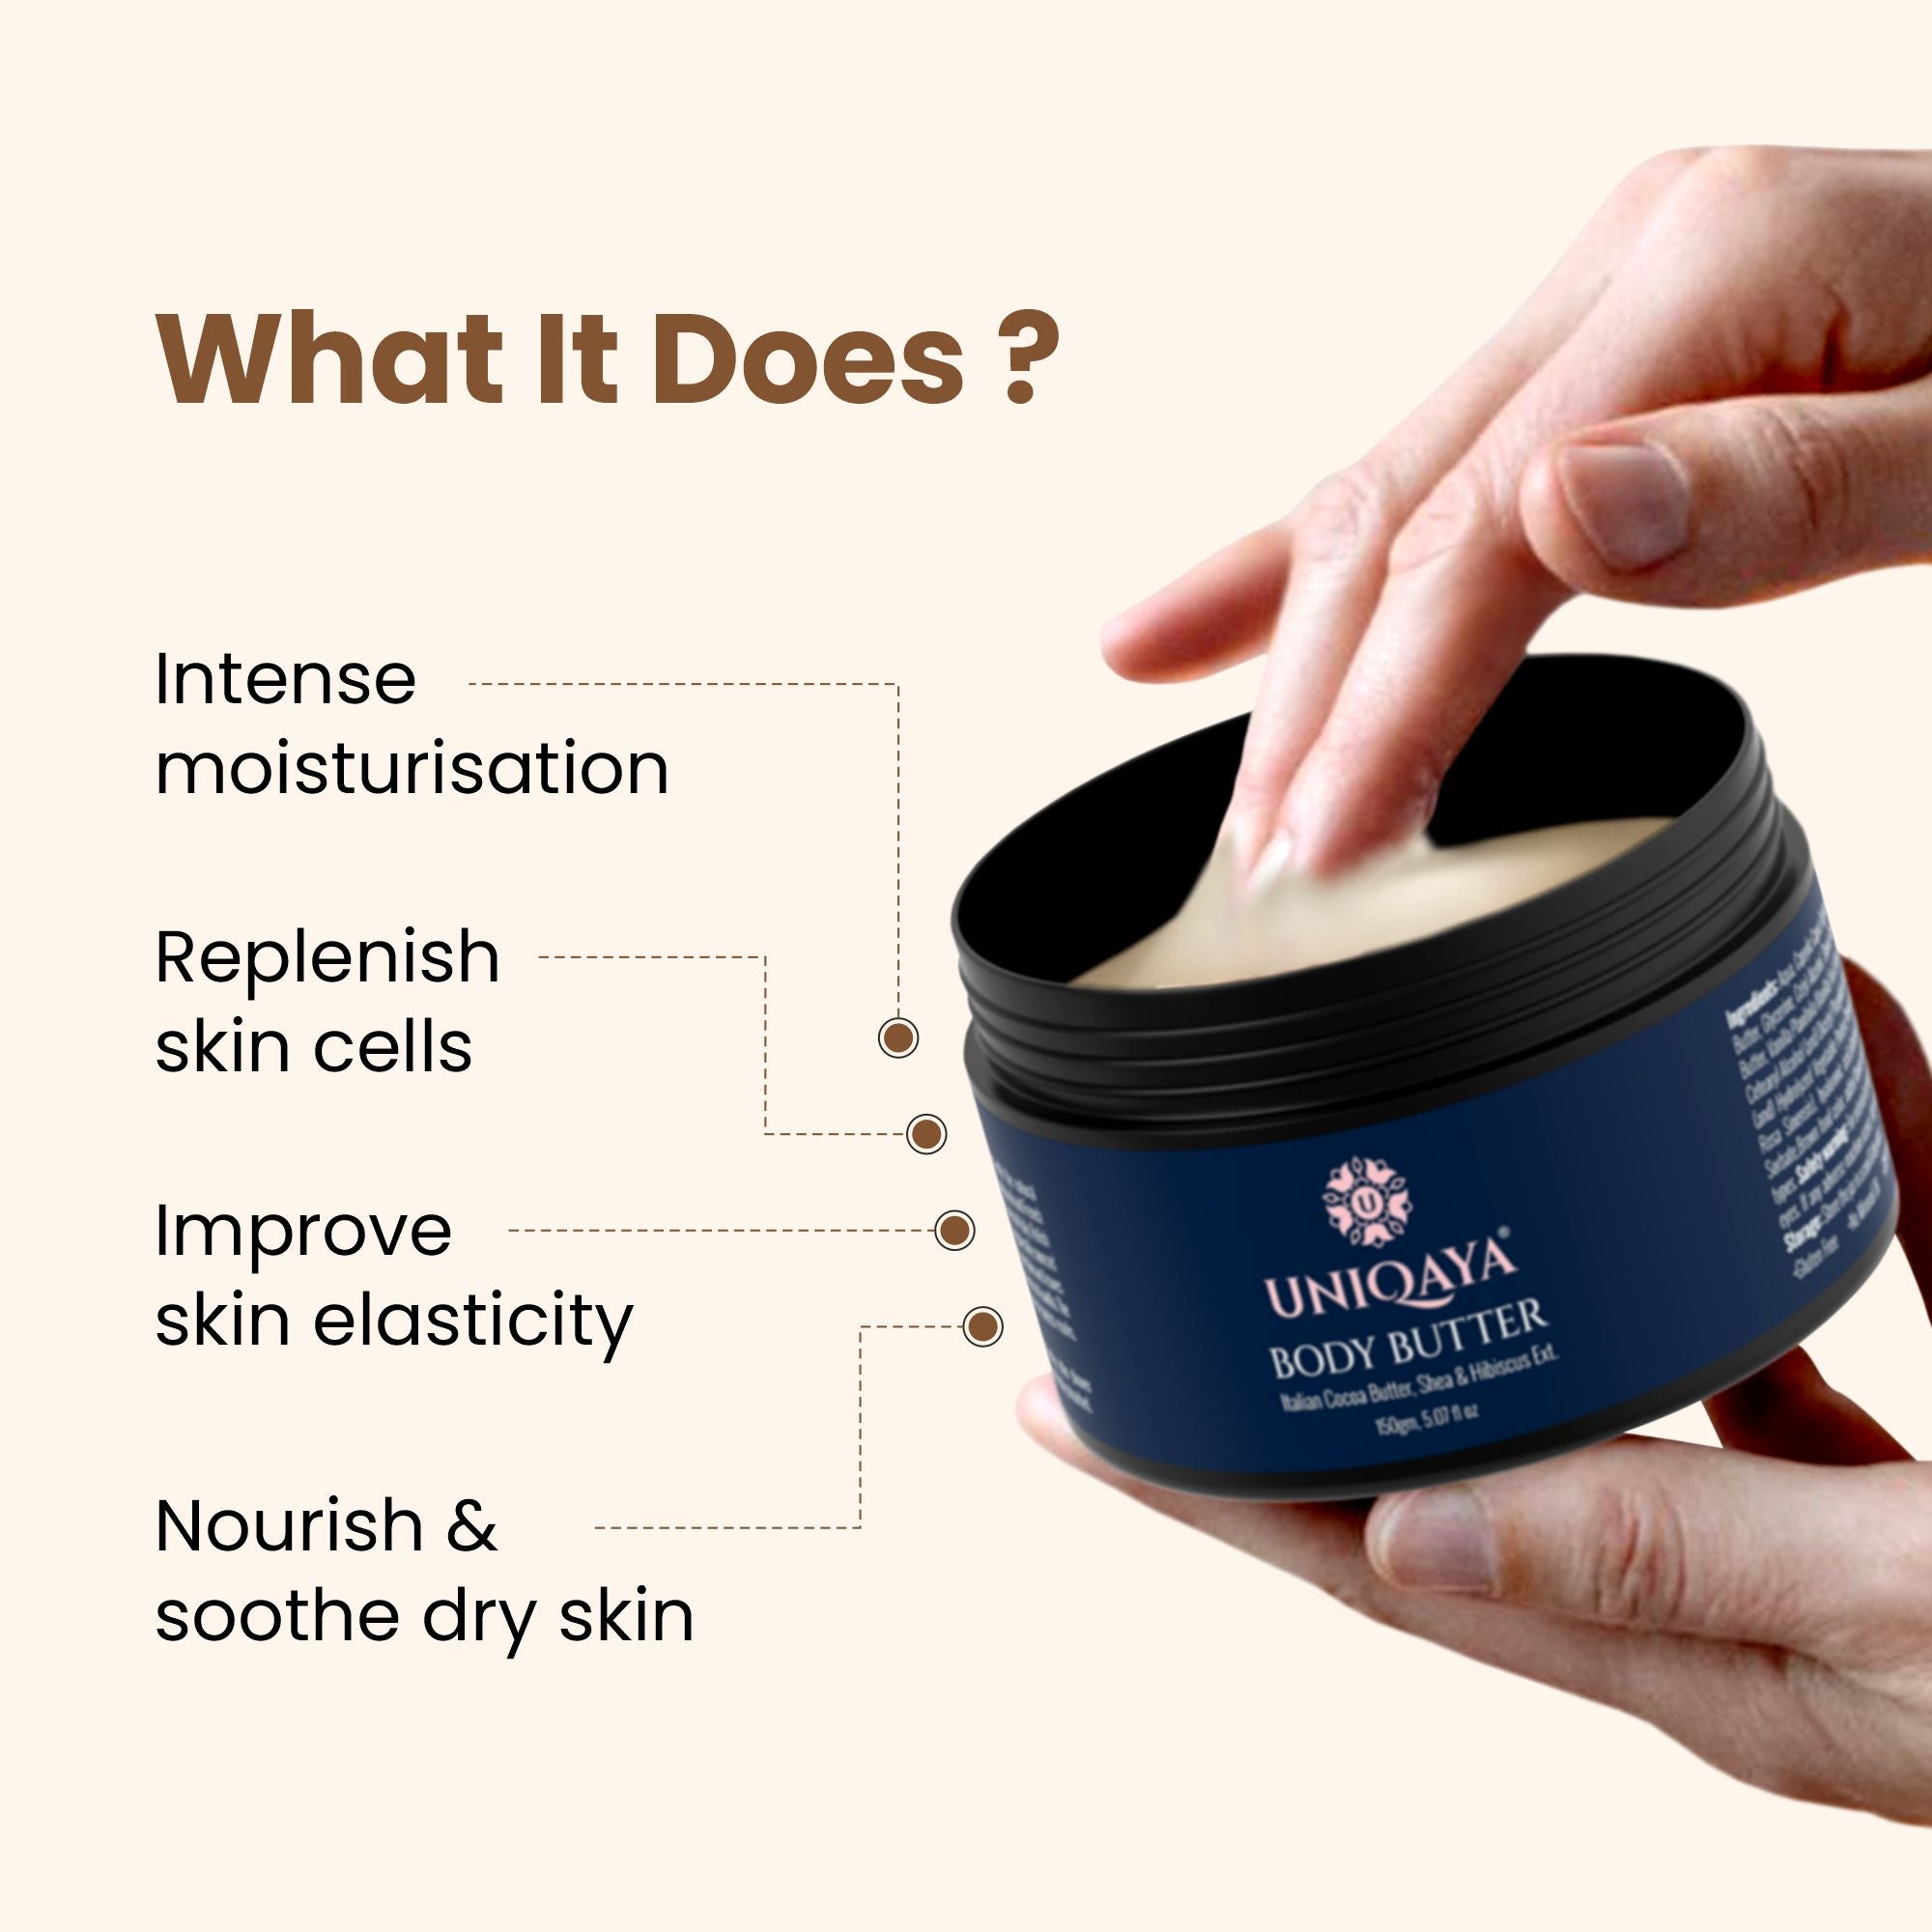 Uniqaya Body Butter What it Does?